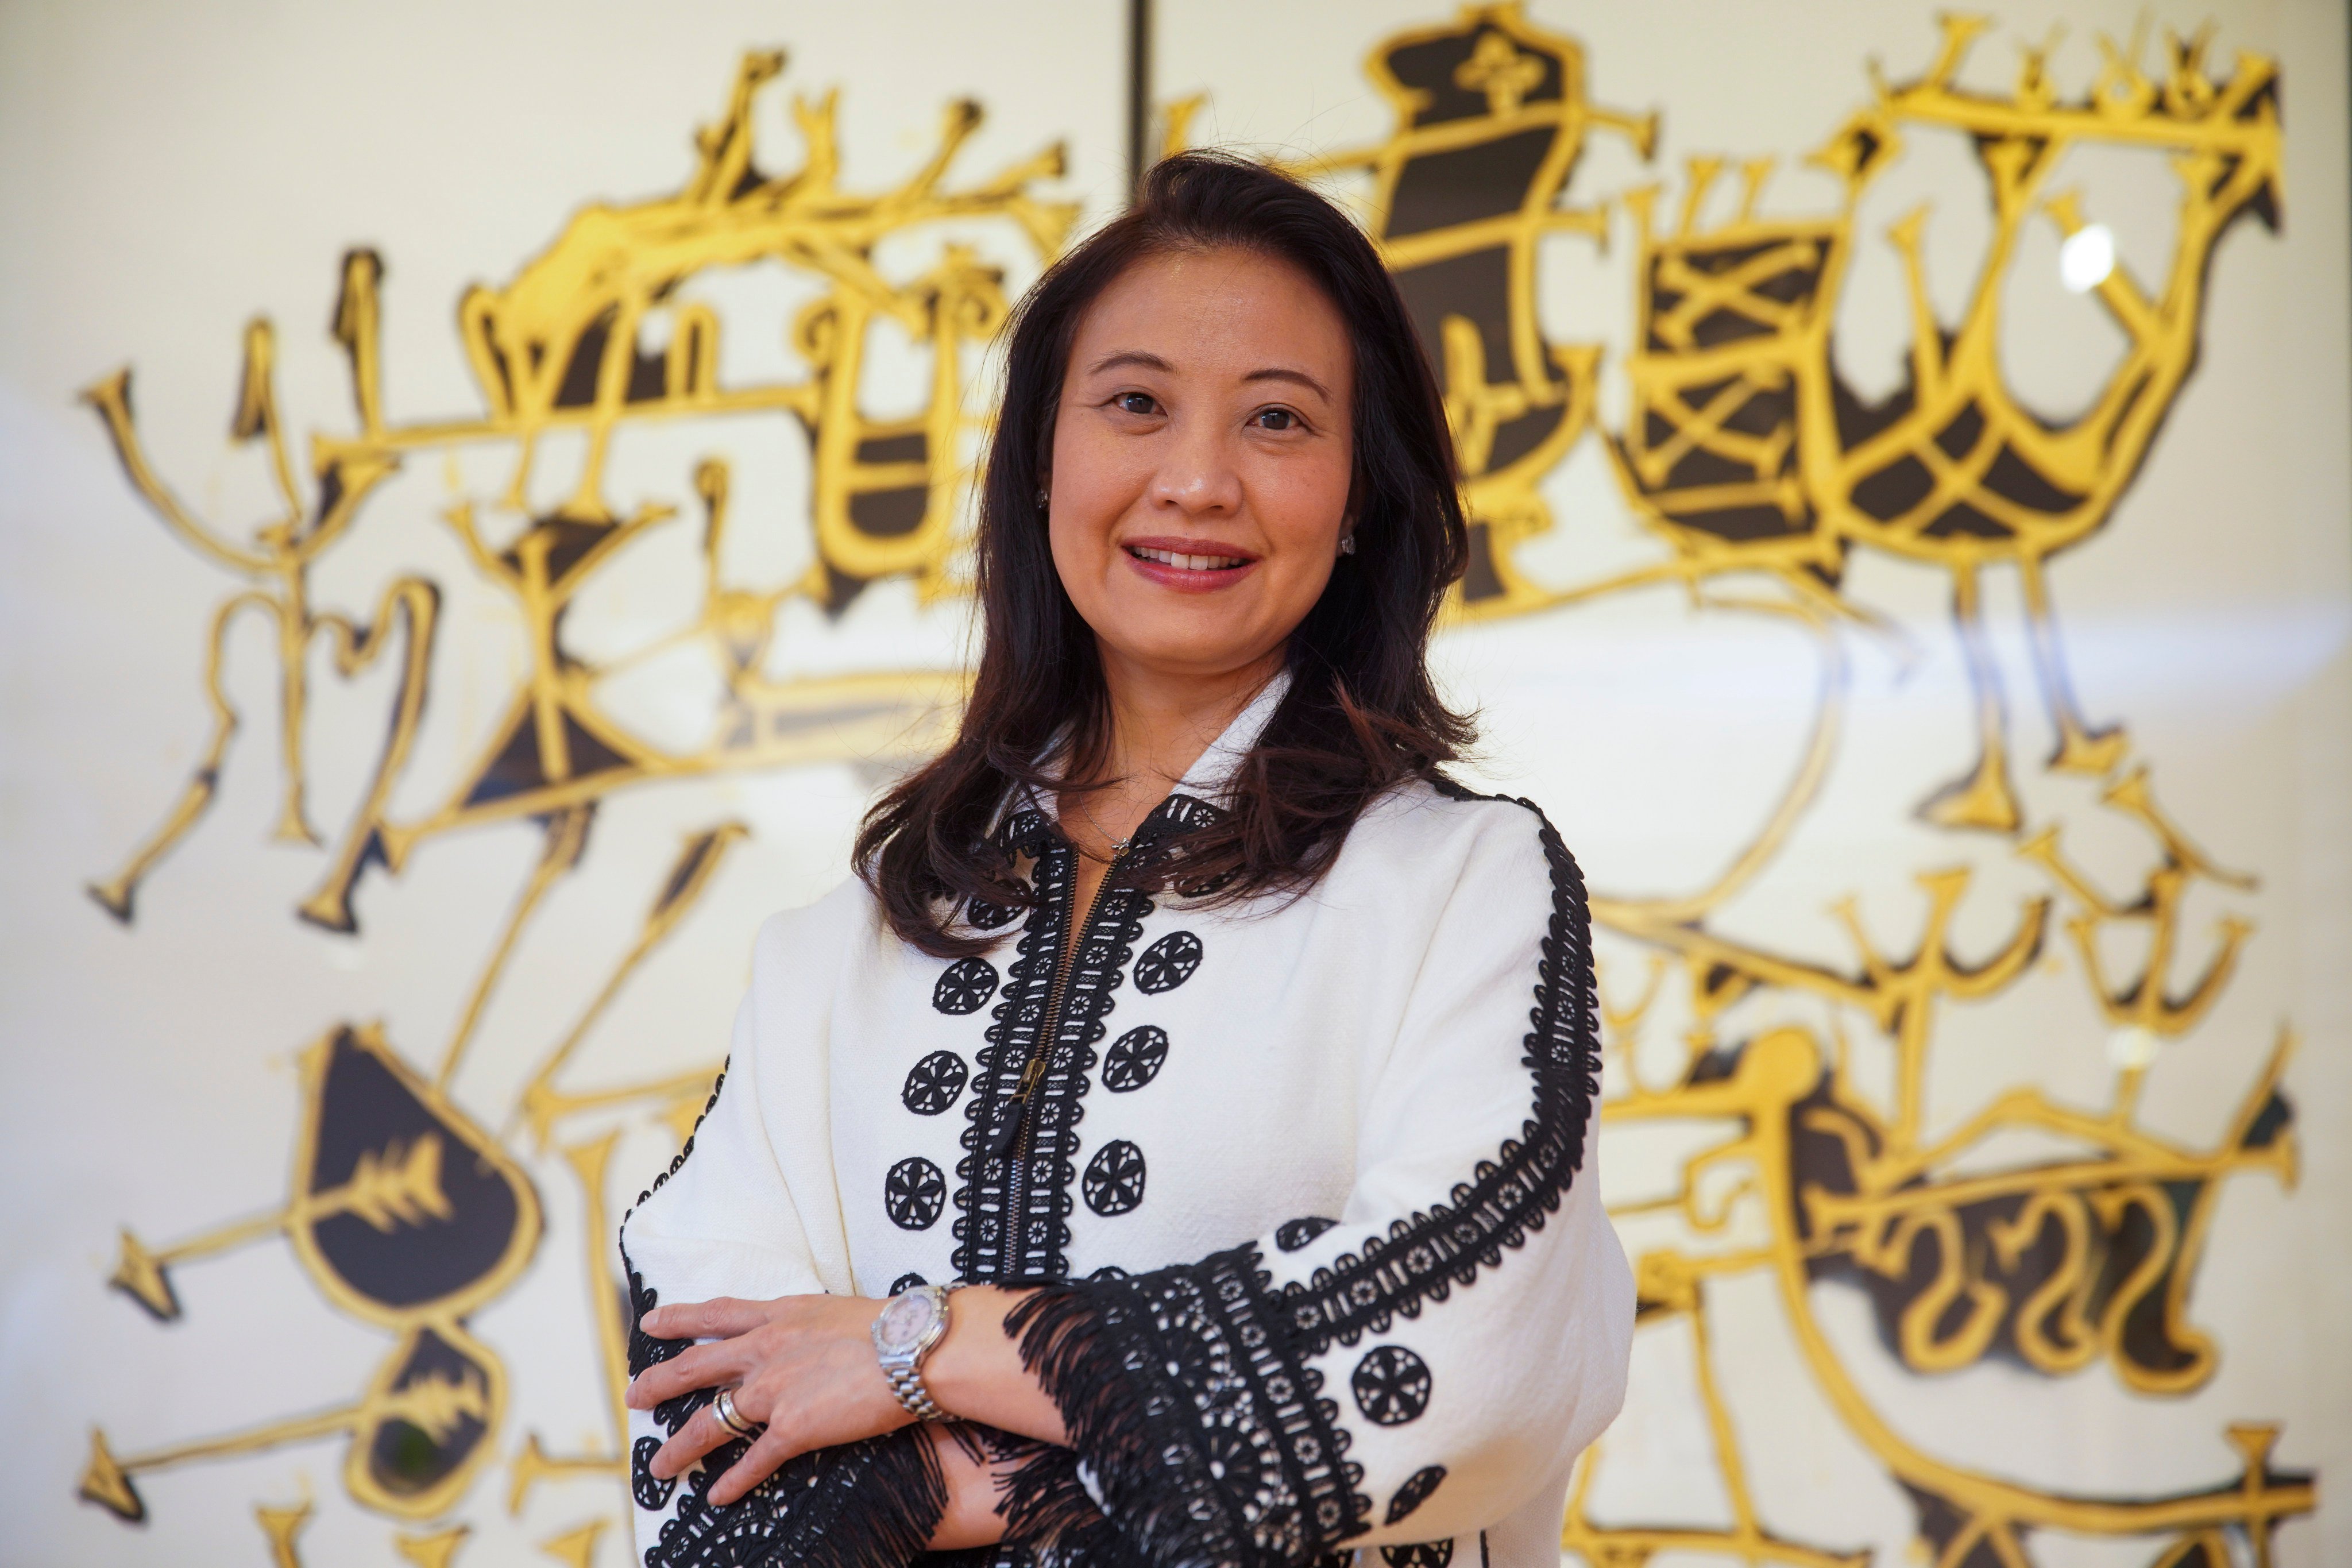 Daphne King-Yao talks to the Post about growing up around art, joining her mother Alice King’s art gallery Alisan Fine Arts, and opening a branch in New York. Photo: Winson Wong